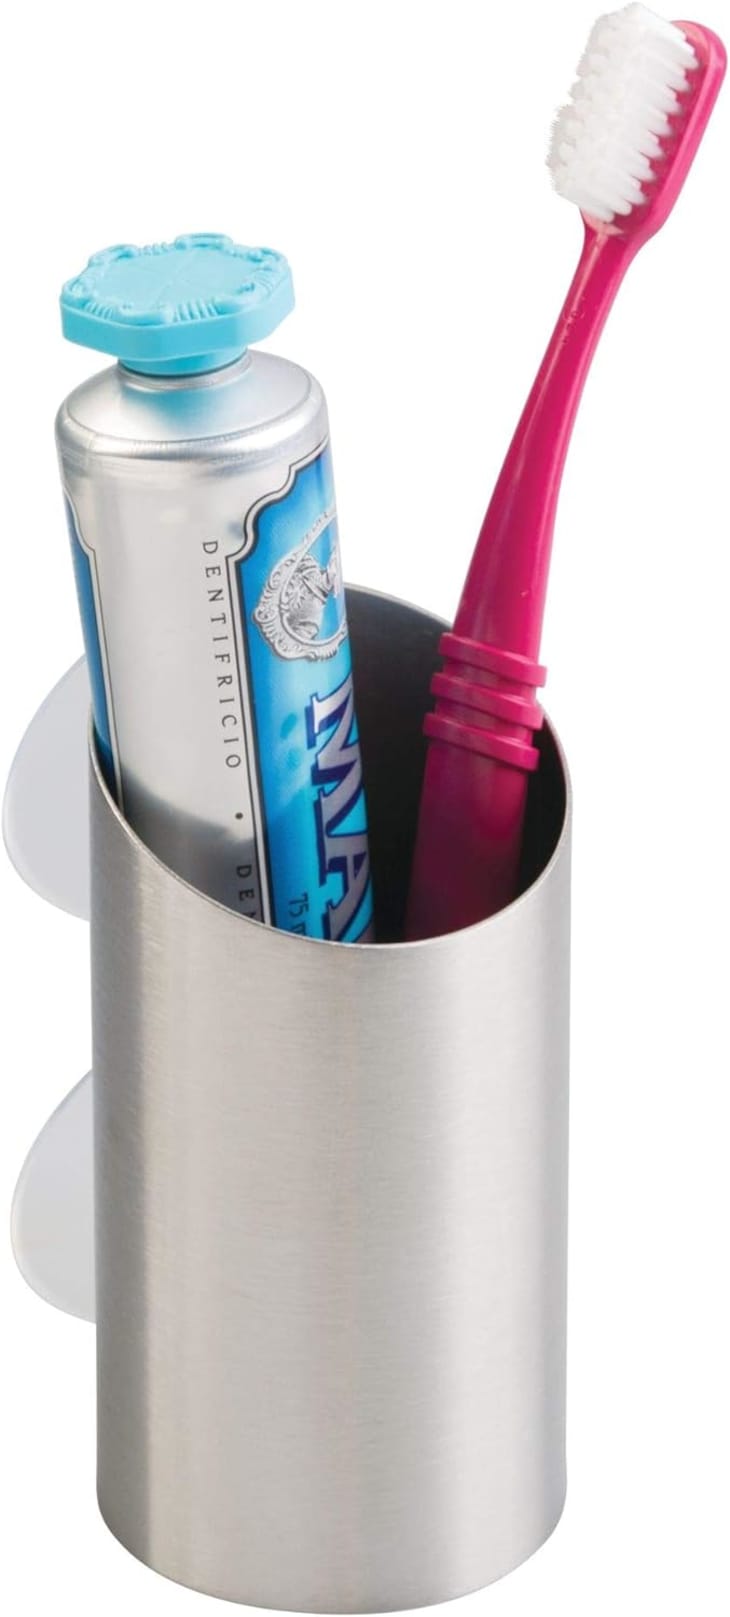 Product Image: iDesign Forma Stainless Steel Suction Toothbrush and Razor Holder